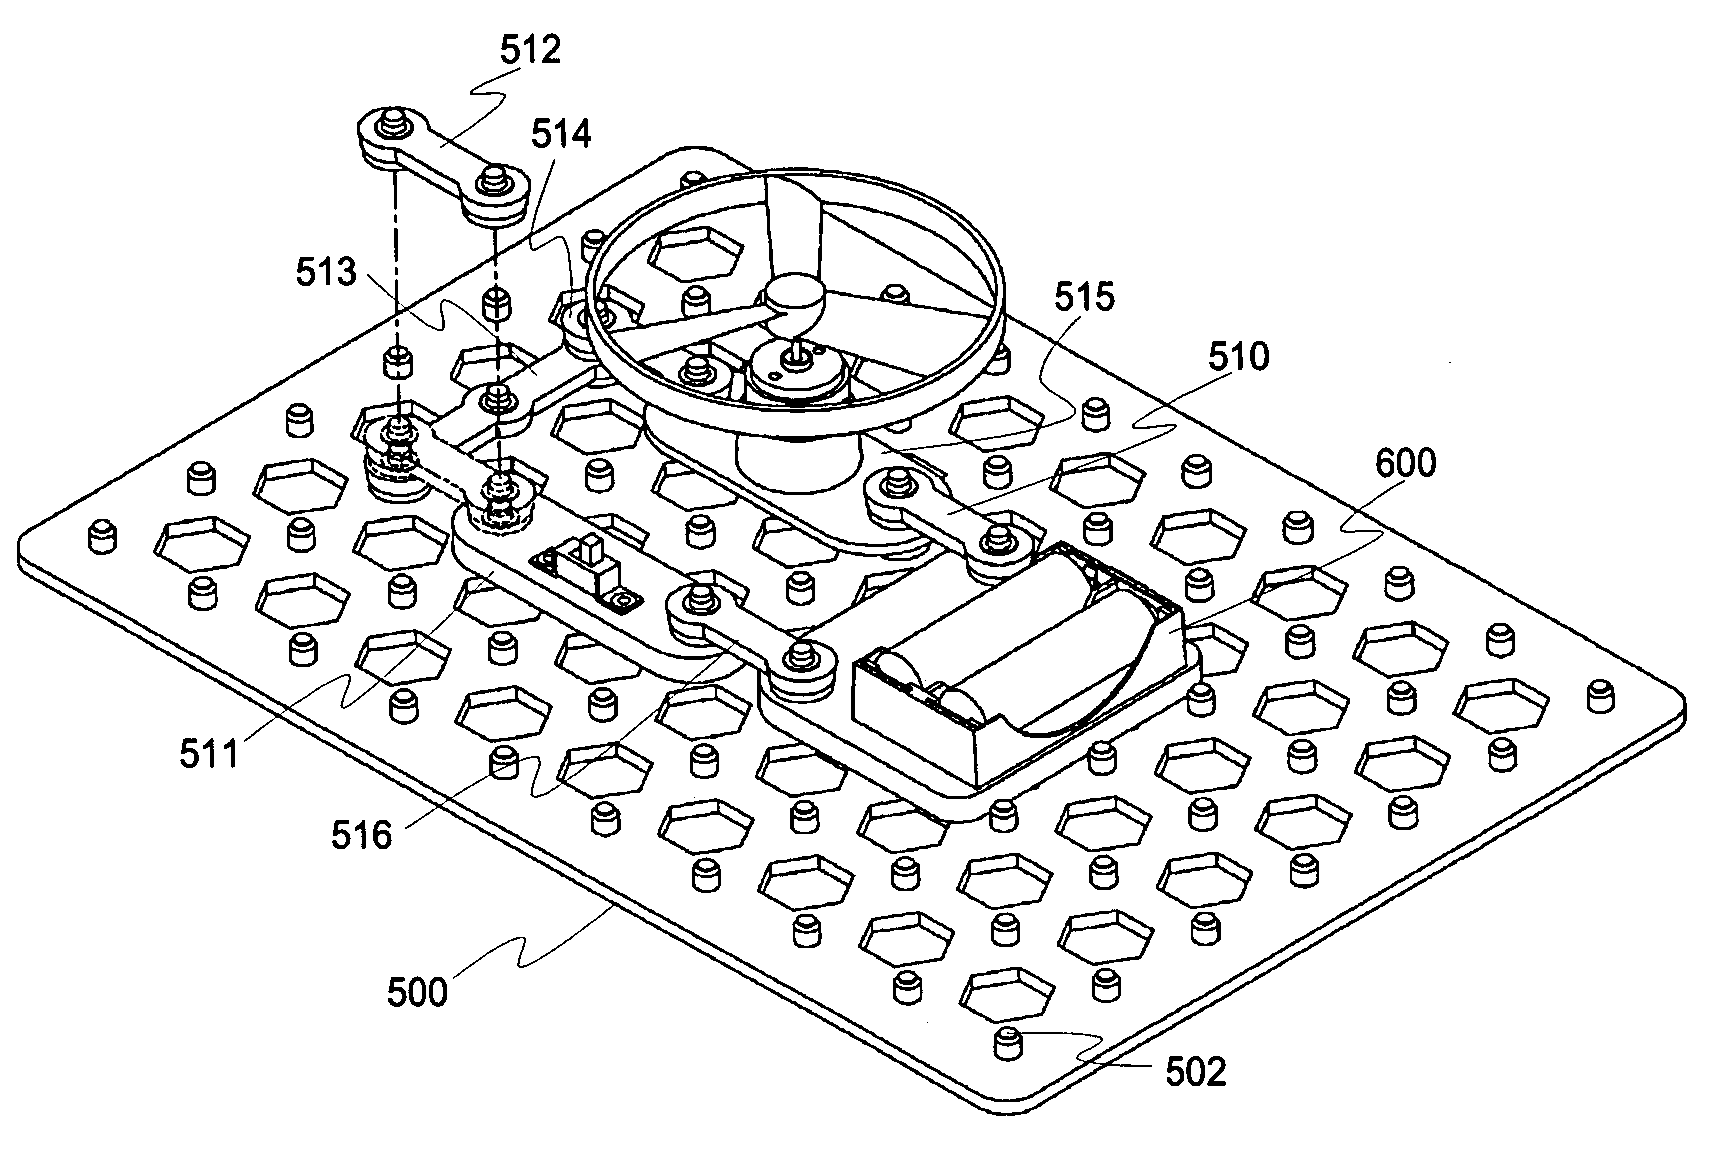 Electronic toy and teaching aid safety devices